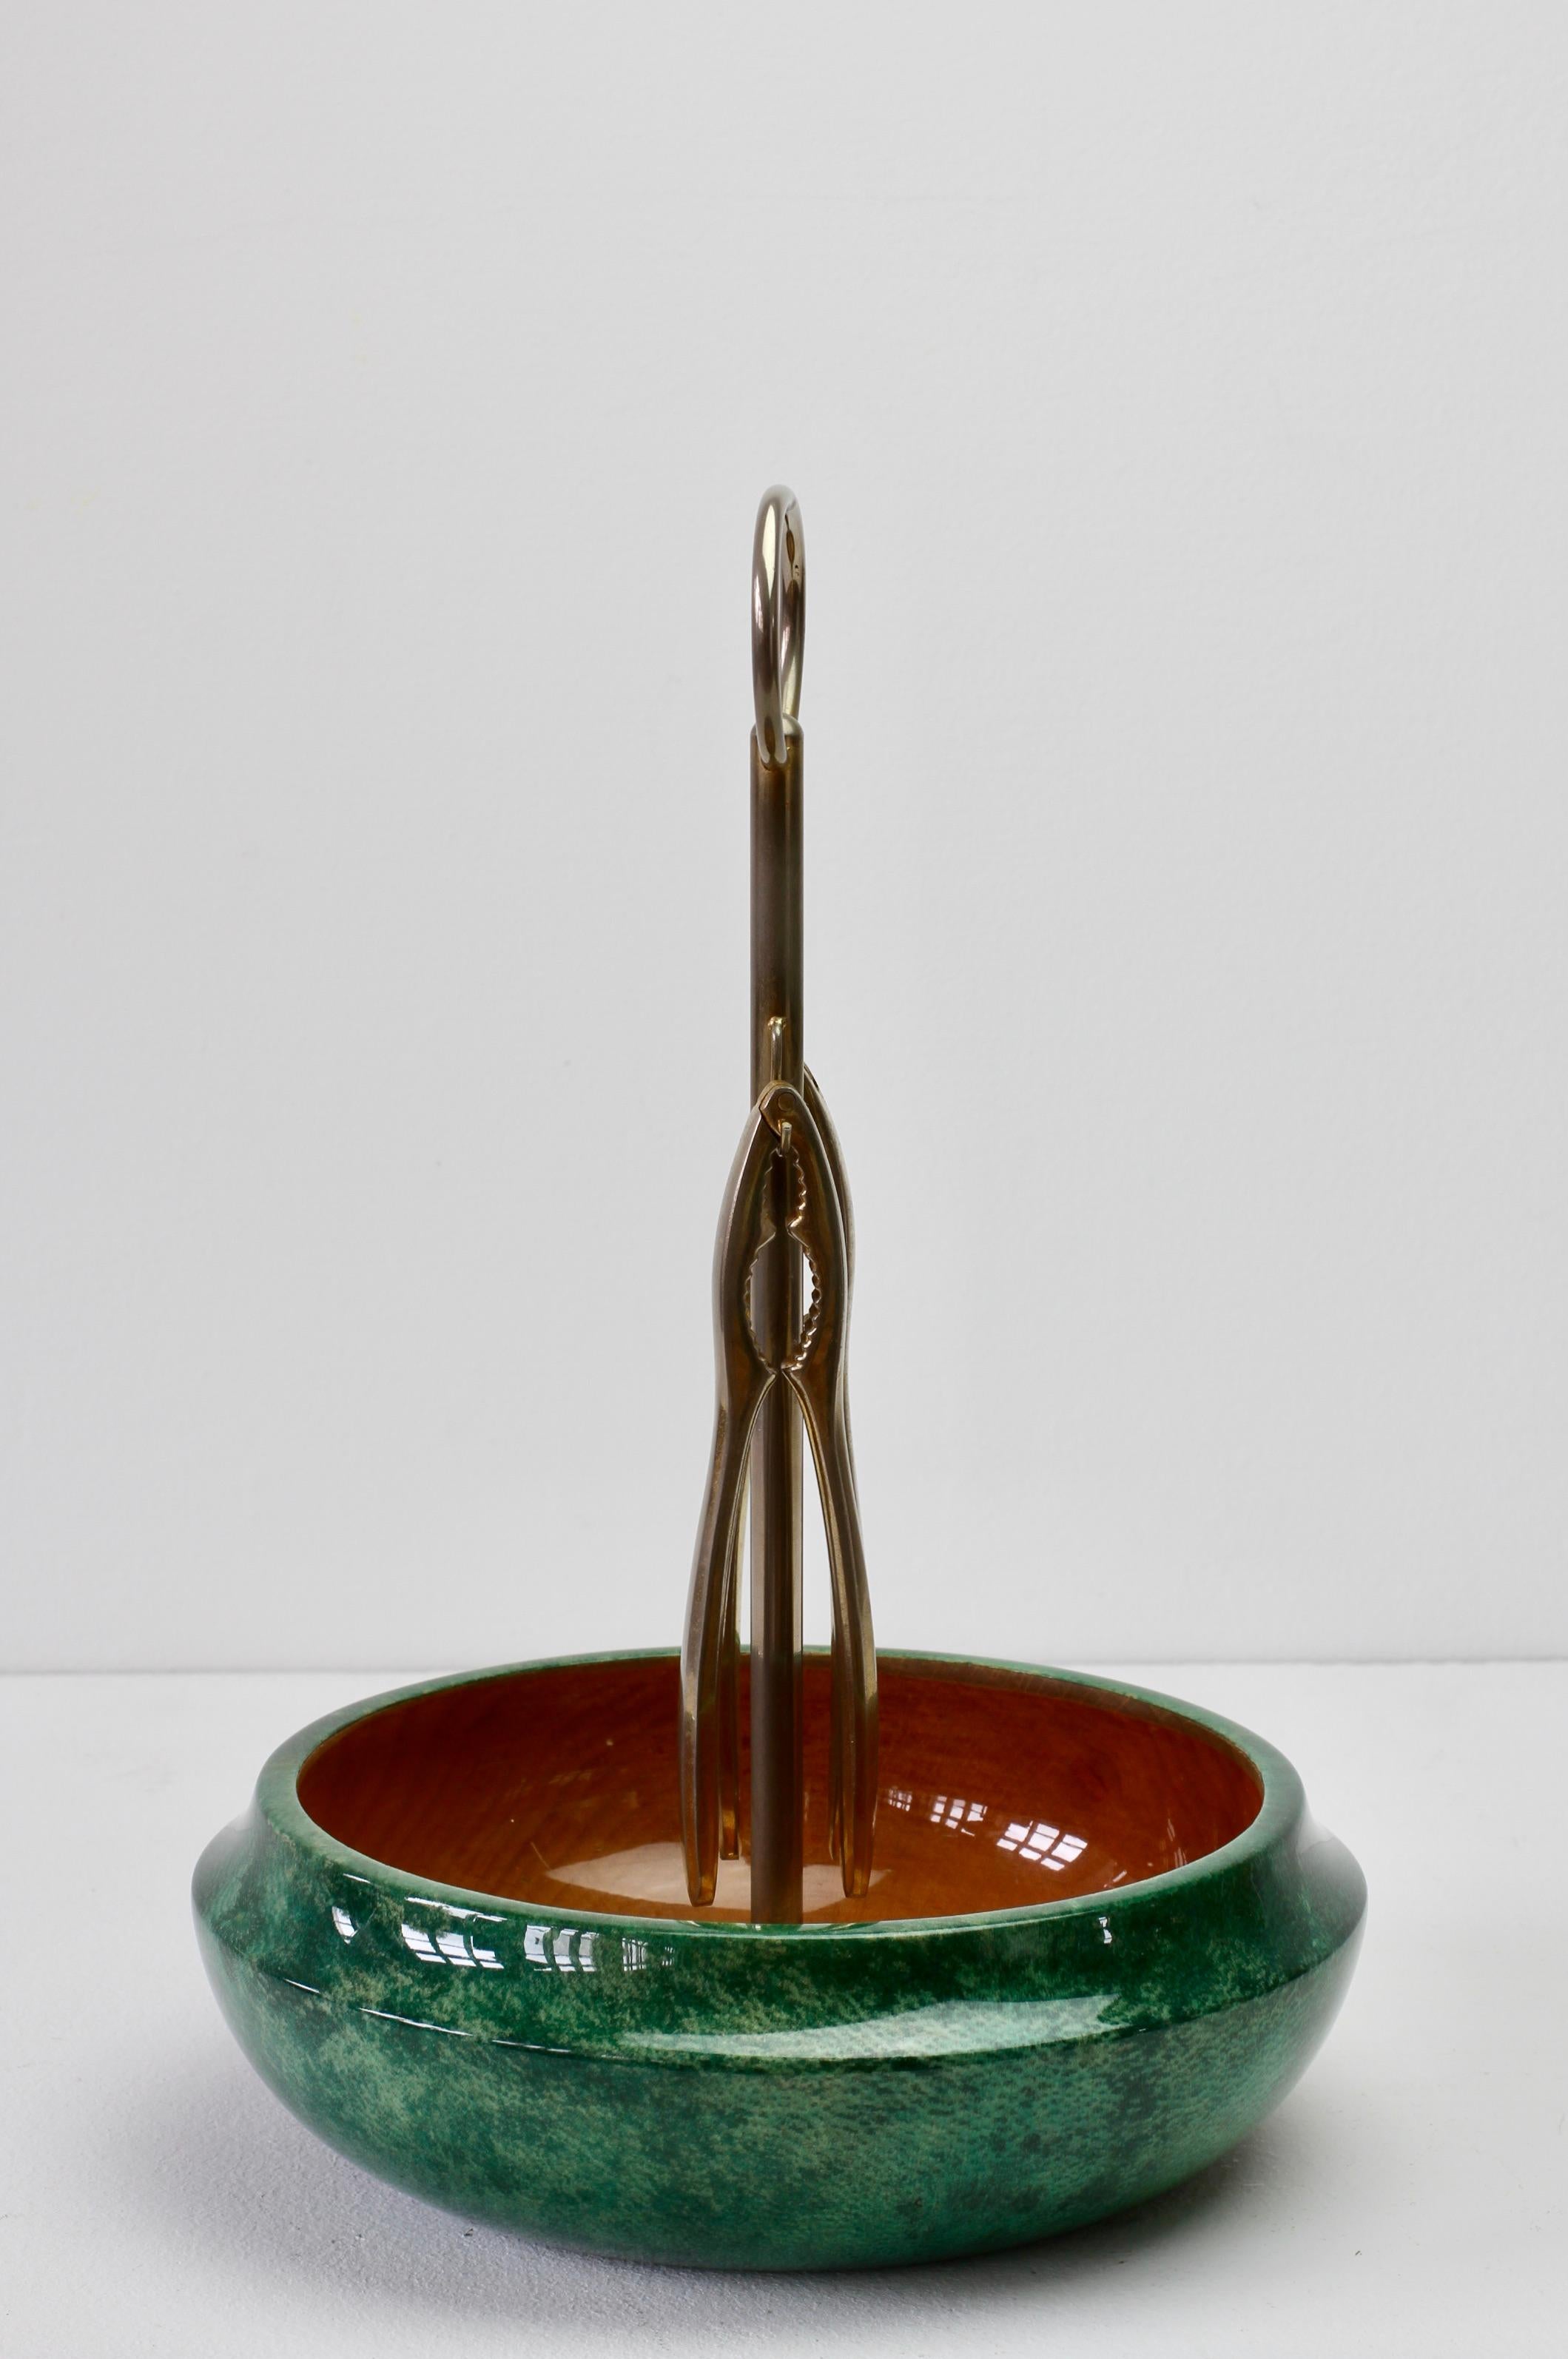 Midcentury Italian 1960s nut bowl with original nutcrackers by Aldo Tura, Milan. Signed with original label green colored and lacquered goatskin leather combined with cast metal carrier / holder is perfect for carrying your favorite nut selection to